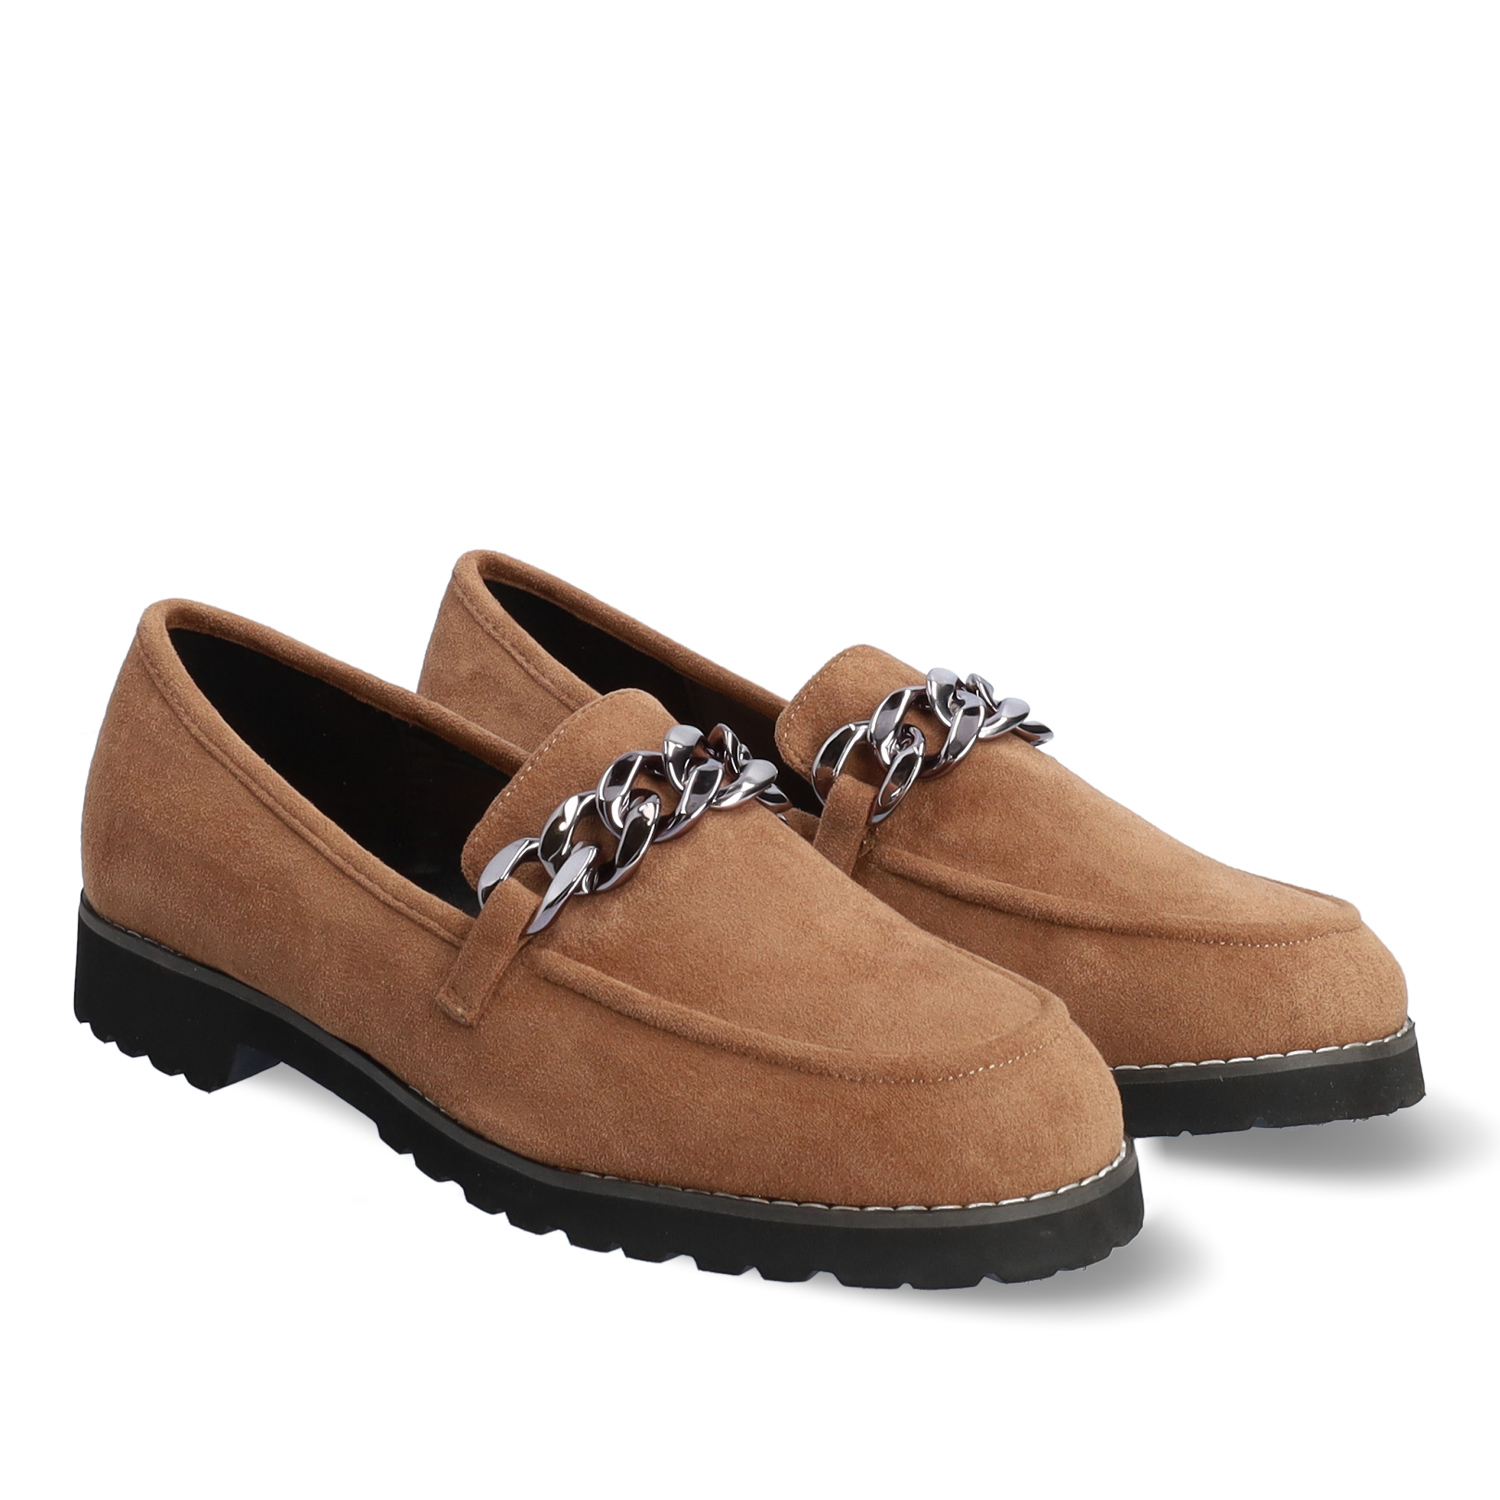 Moccasins in light brown faux suede and track sole 